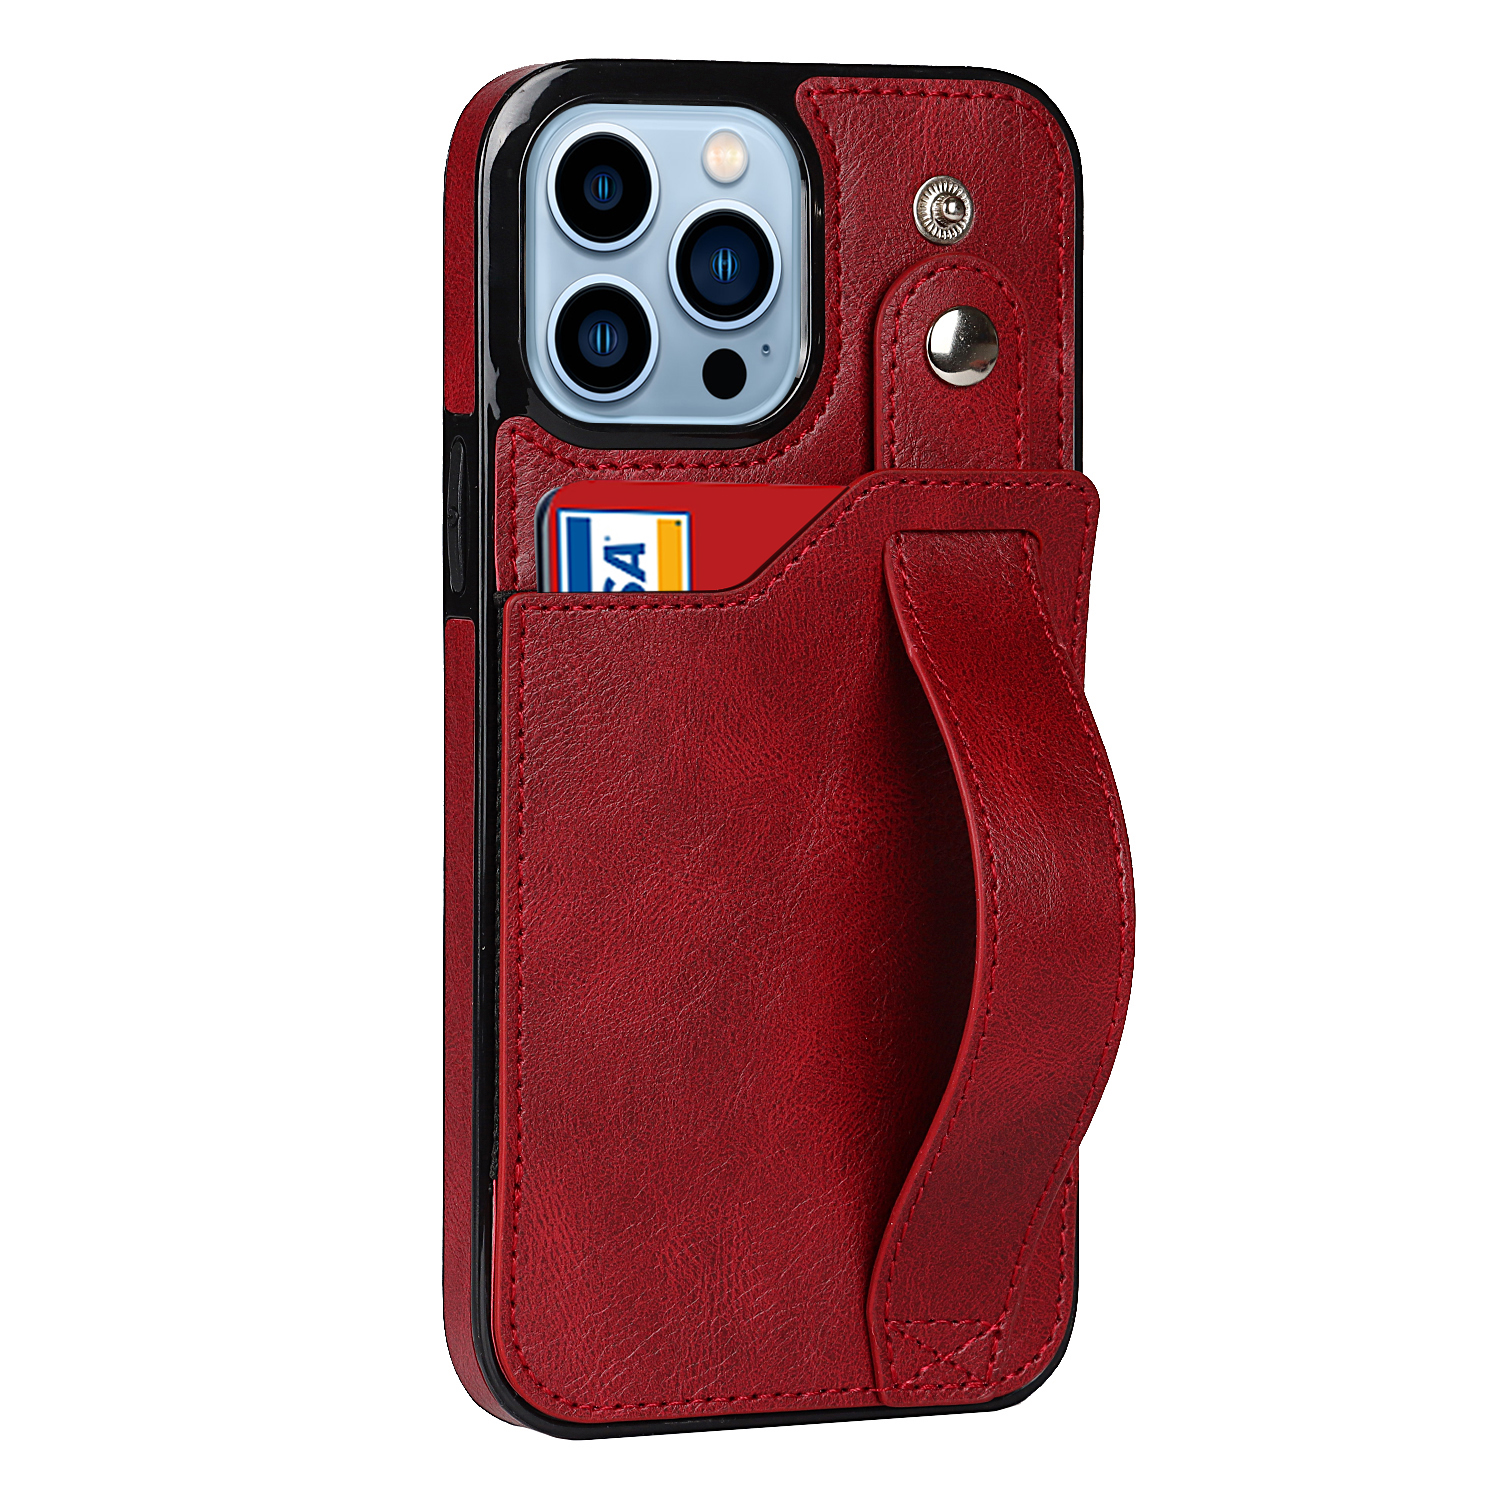 Samsung Galaxy S20 Ultra Back Cover Hoesje met Handvat - leer- Handvat - Backcover - Samsung Galaxy S20 Ultra - Rood